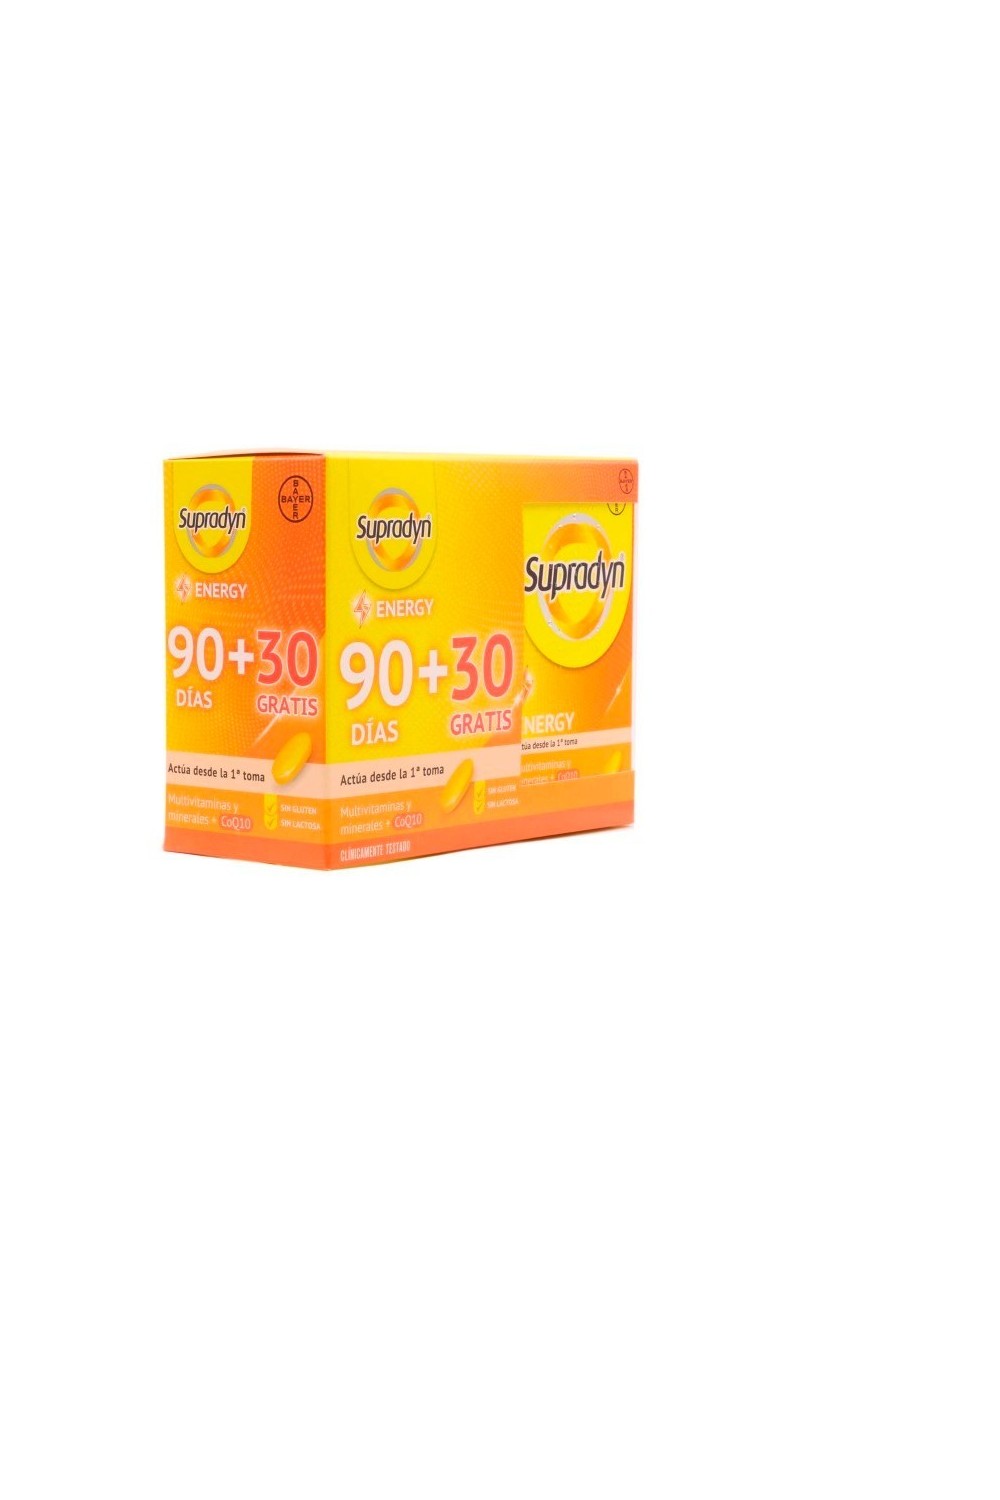 Supradyn Energy 90 Tablets + Gift of 30 Tablets